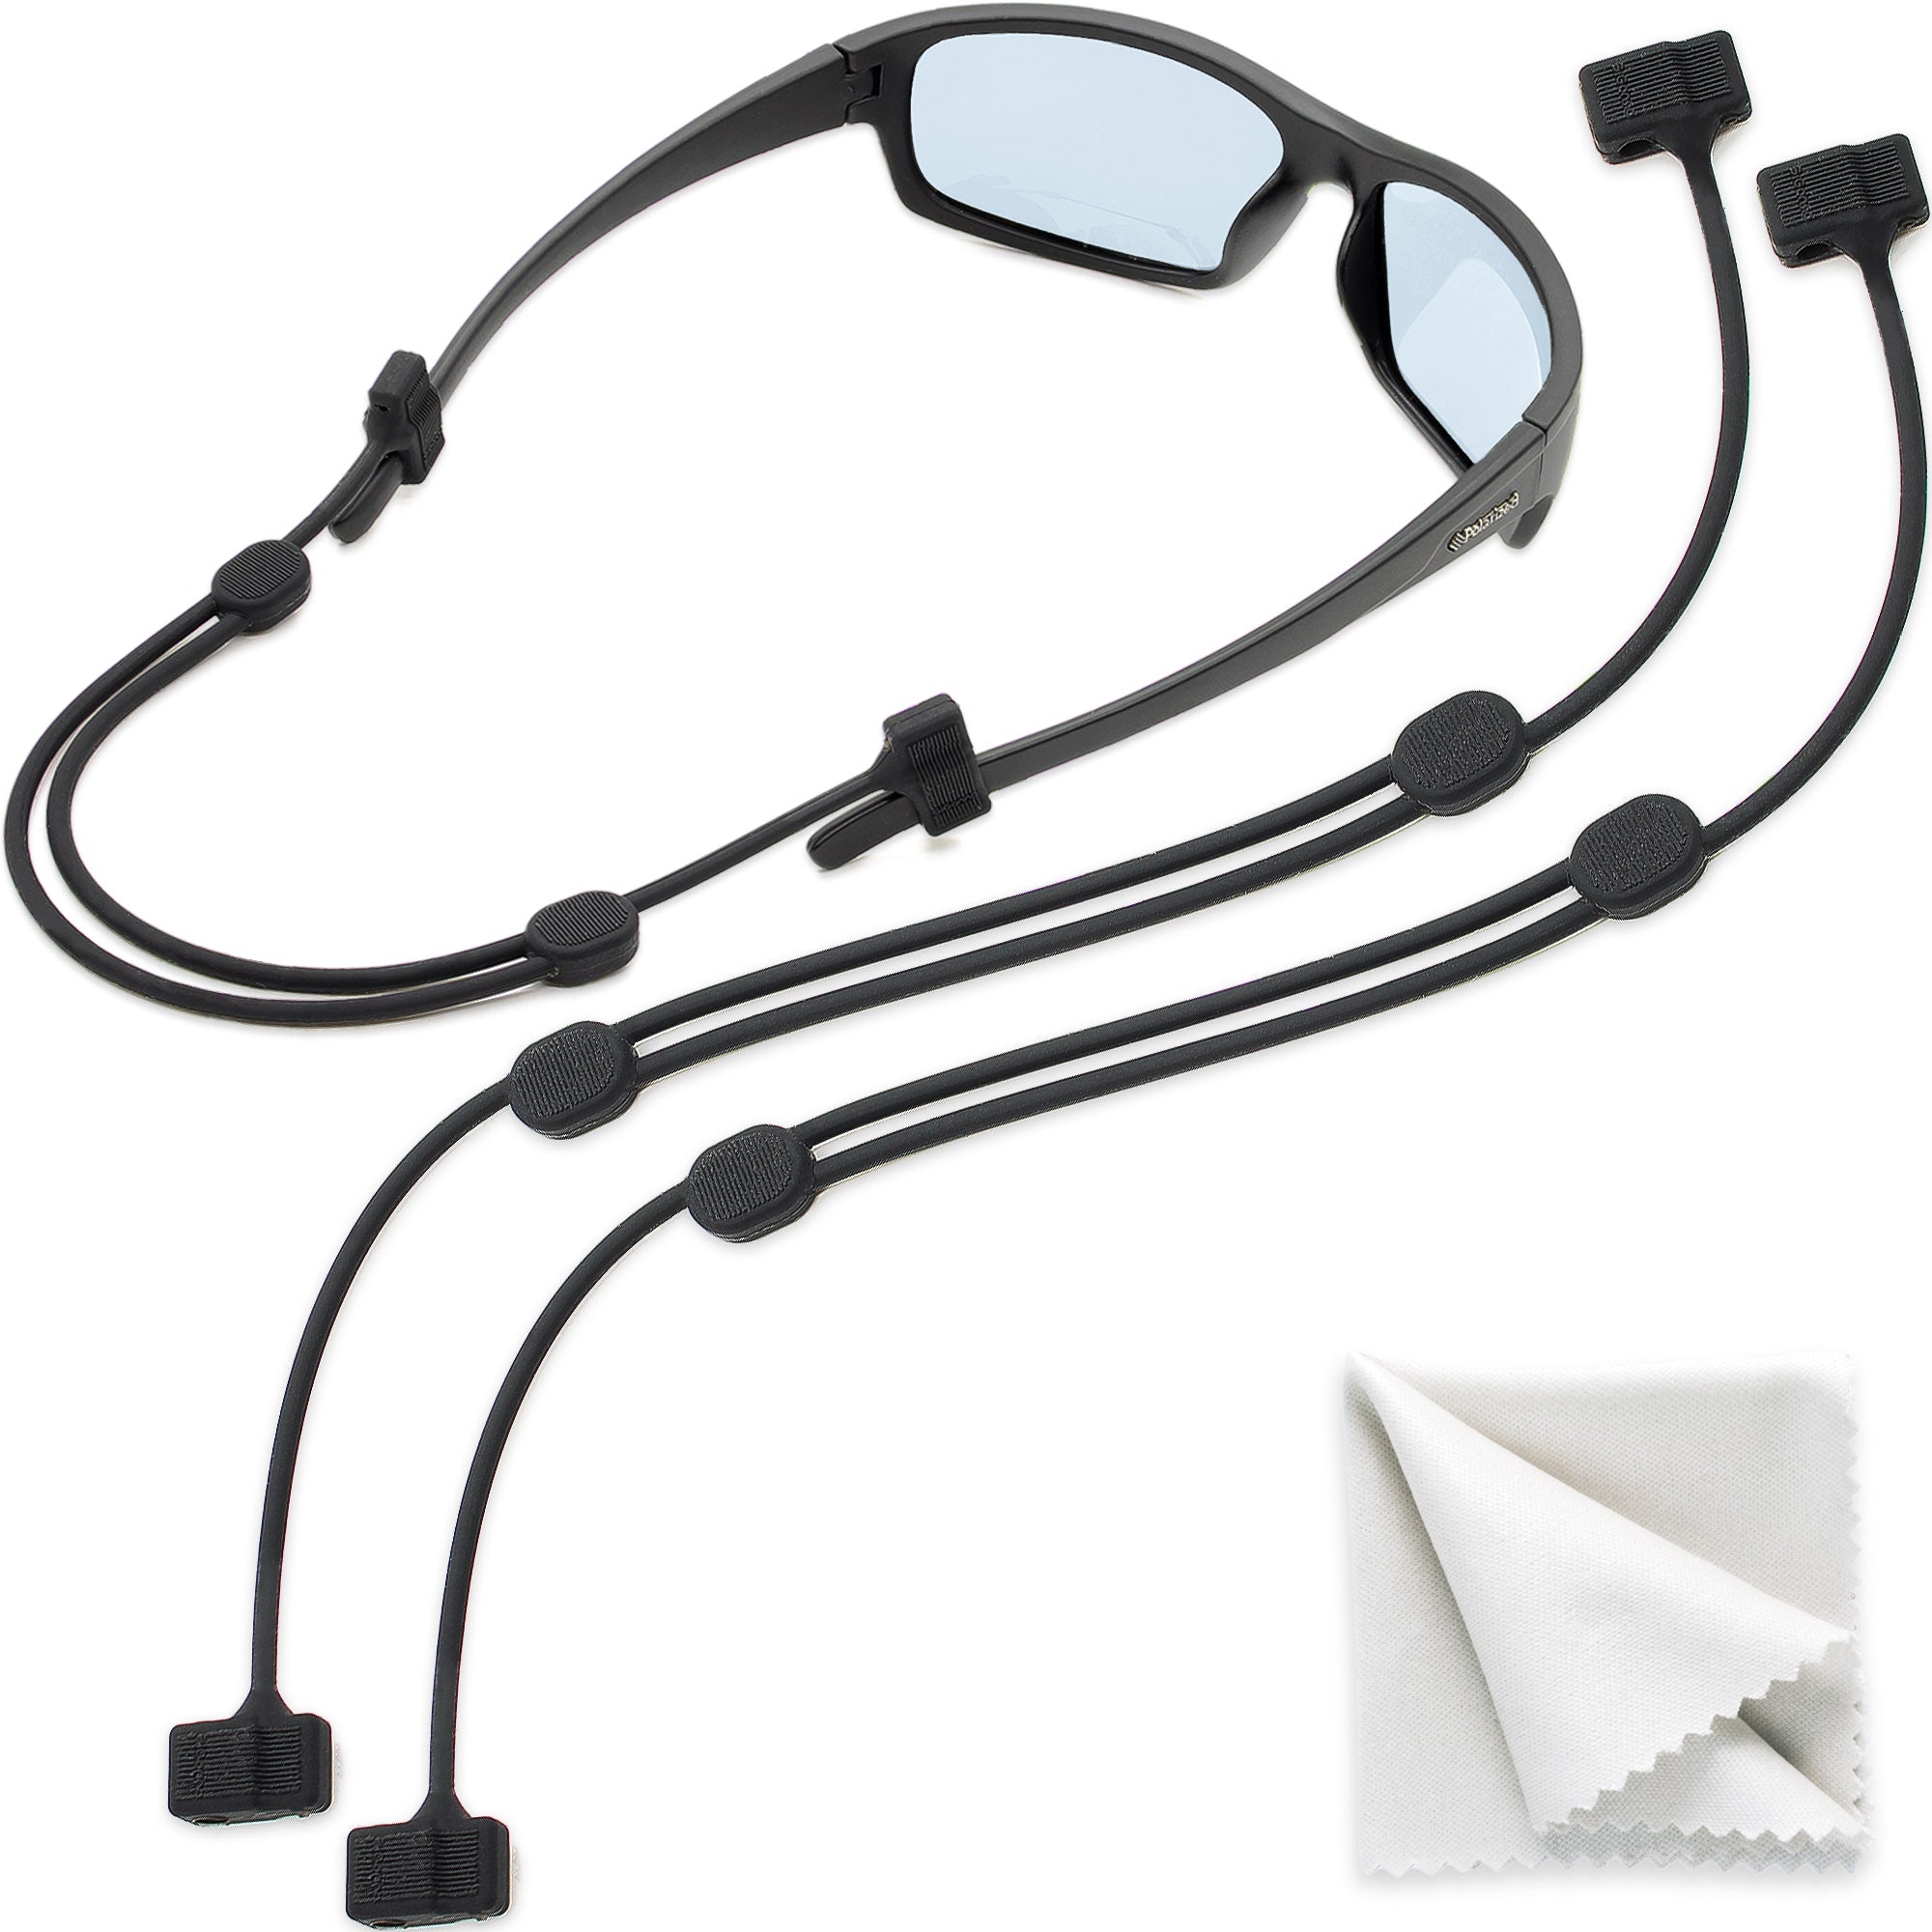 Snugg Fit Anit Slip Silicone String for Eye Glasses Spectacles